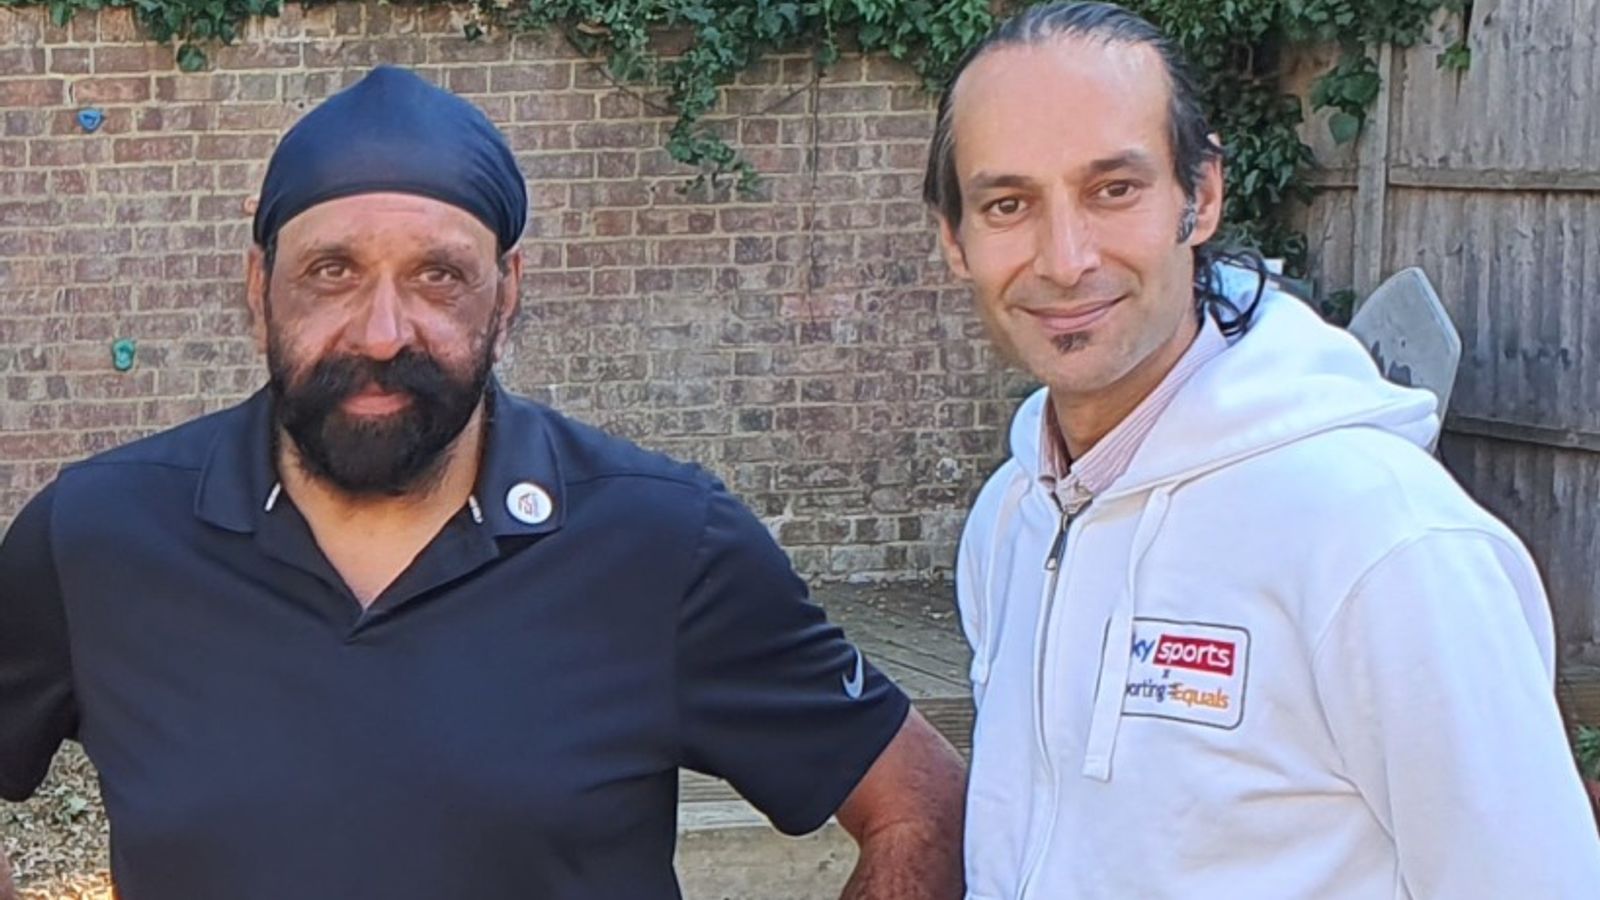 Singh and Sky Sports to call on IFAB to extend head covering guidance